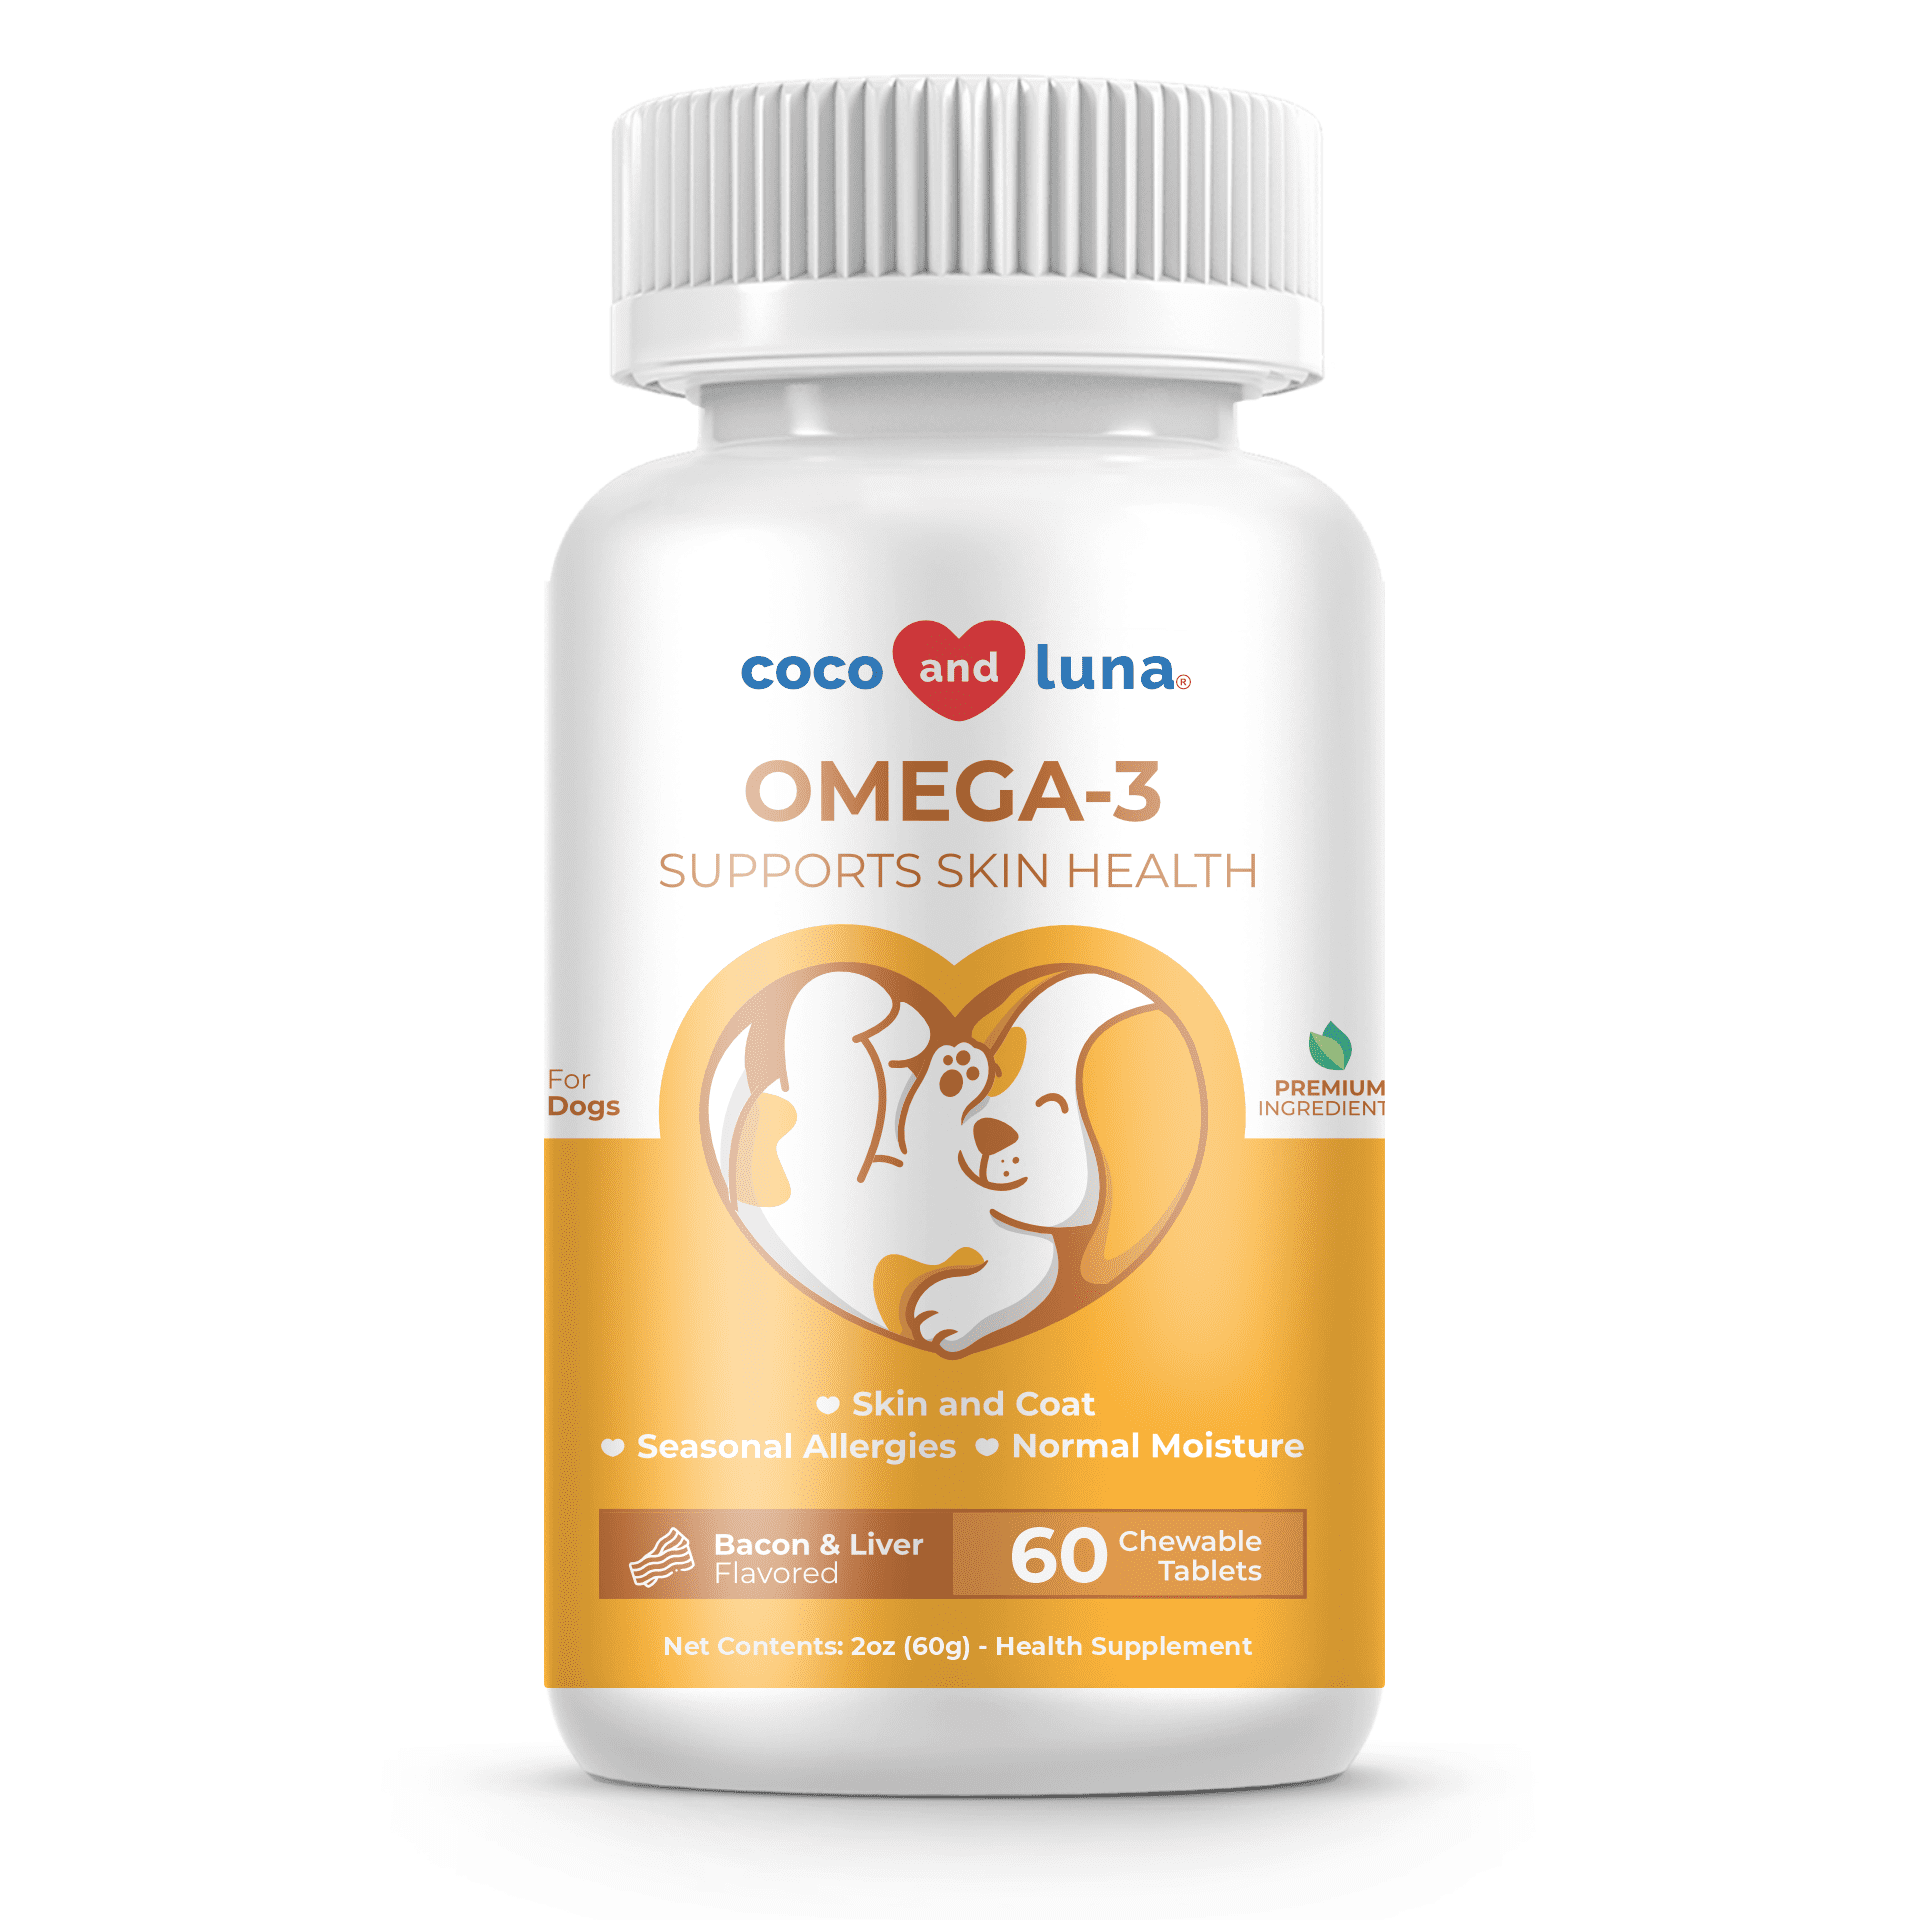 Omega 3 for Dogs - 60 Chewable Tablets